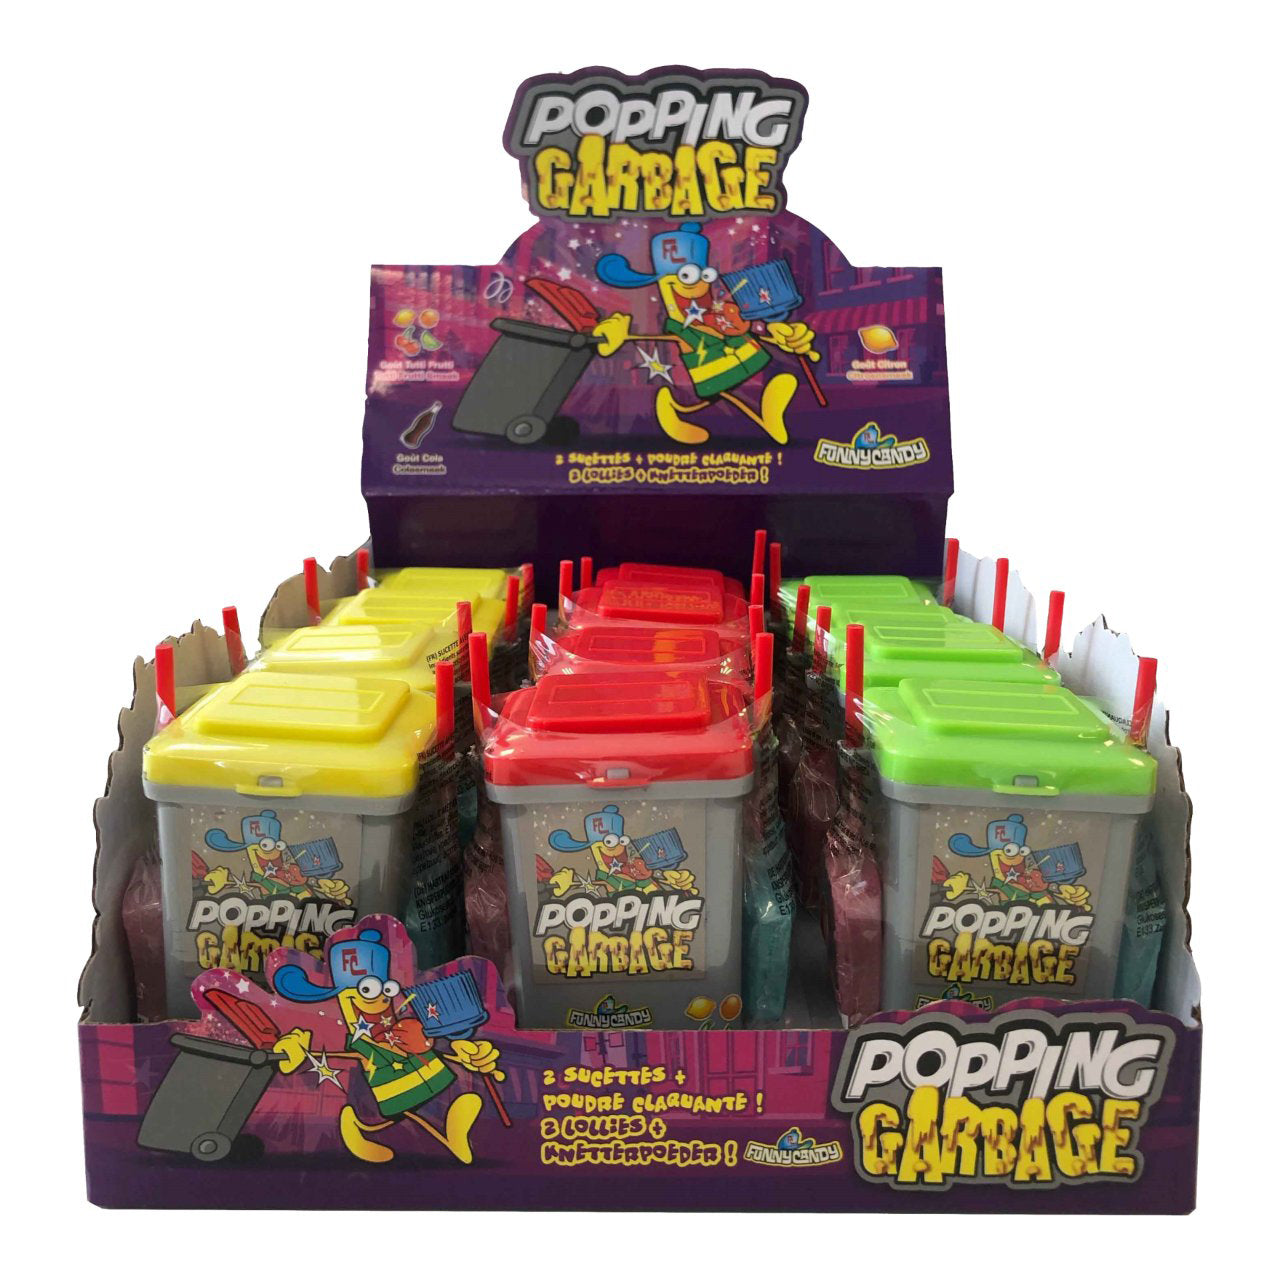 Popping Garbage Bidone Lecca e Polvere - Funny Candy Pz 12